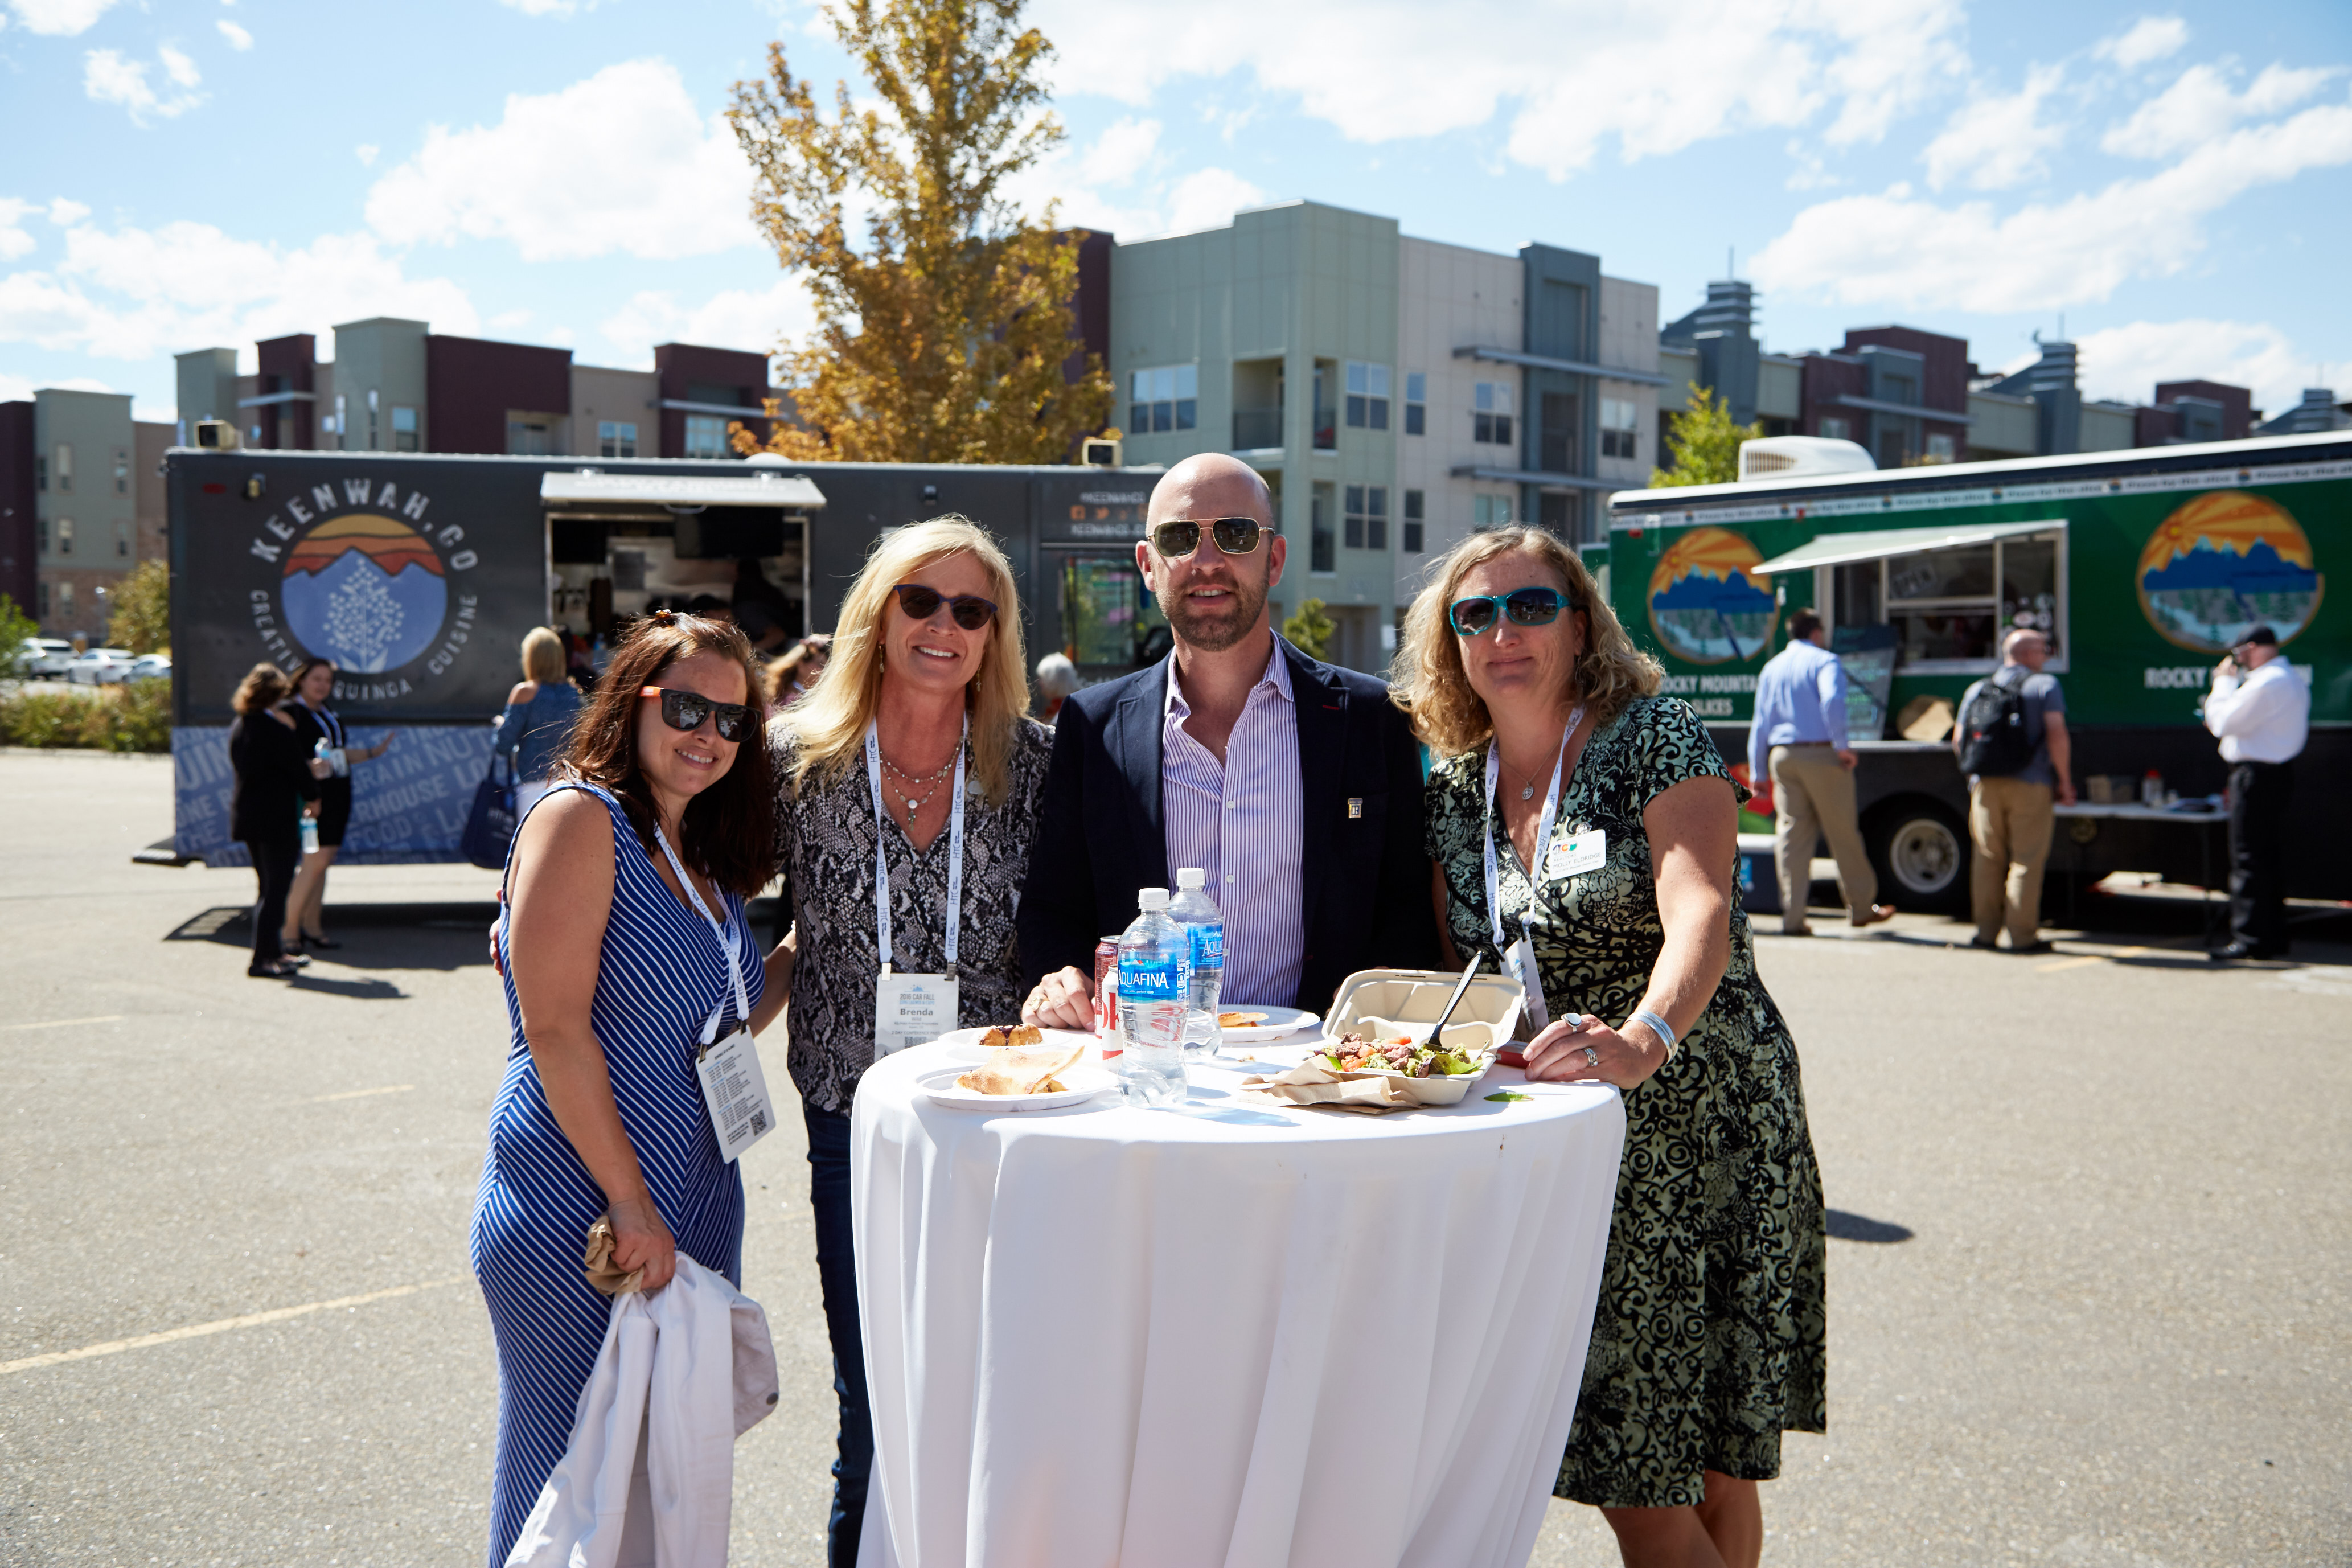 CAR Fall Conference attendees enjoying a food truck village.